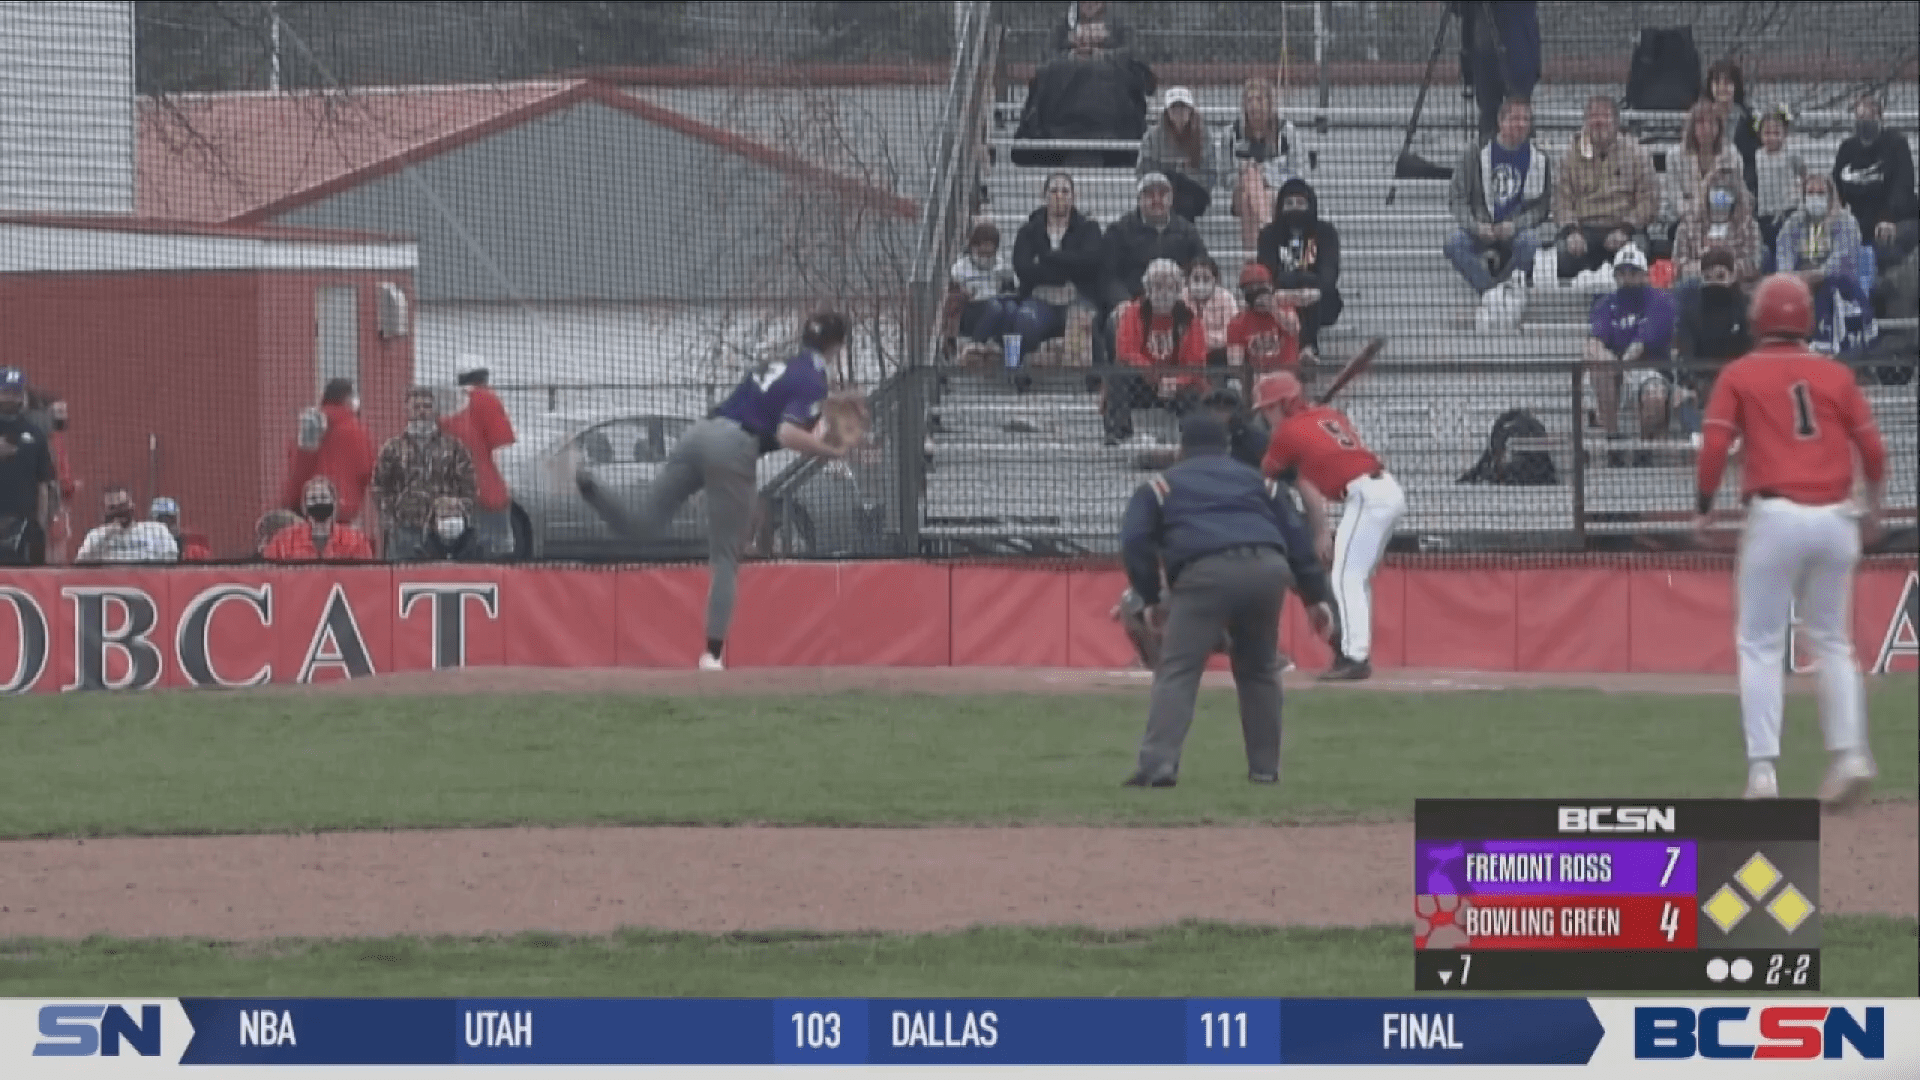 Owen Wright Leads Fremont Ross At The Plate And The Mound Bcsn